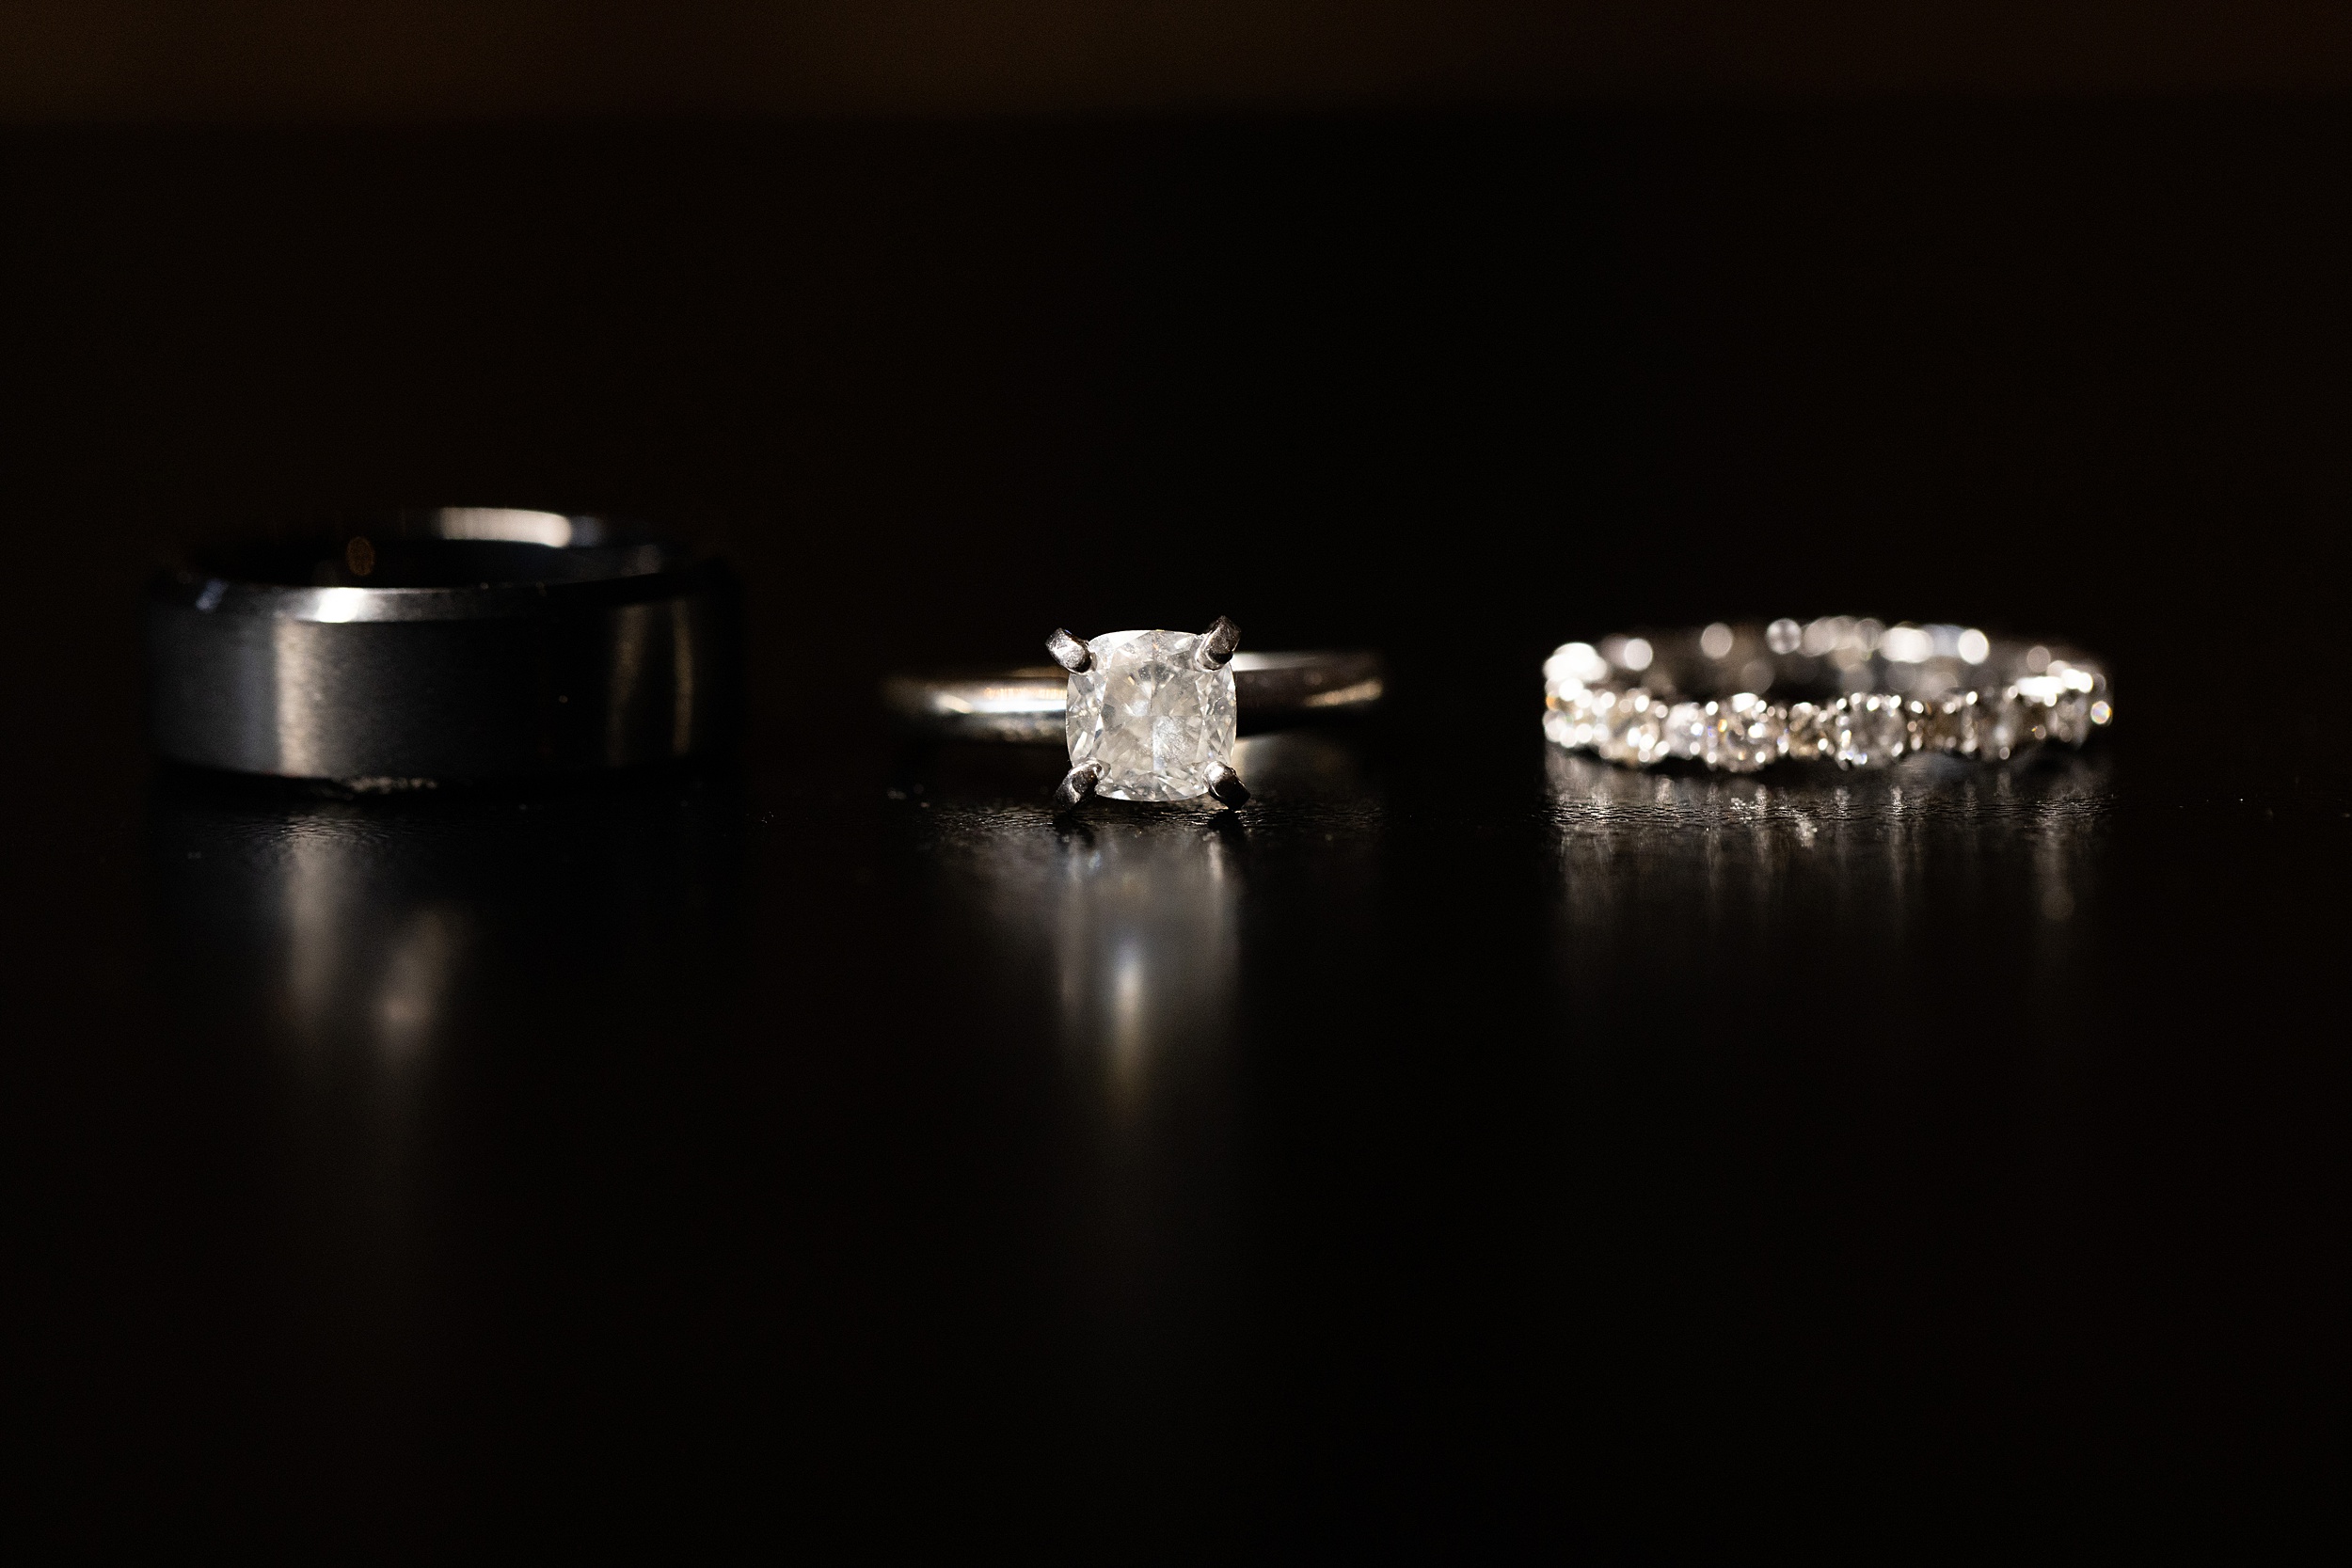 Details of wedding rings sitting on a black table